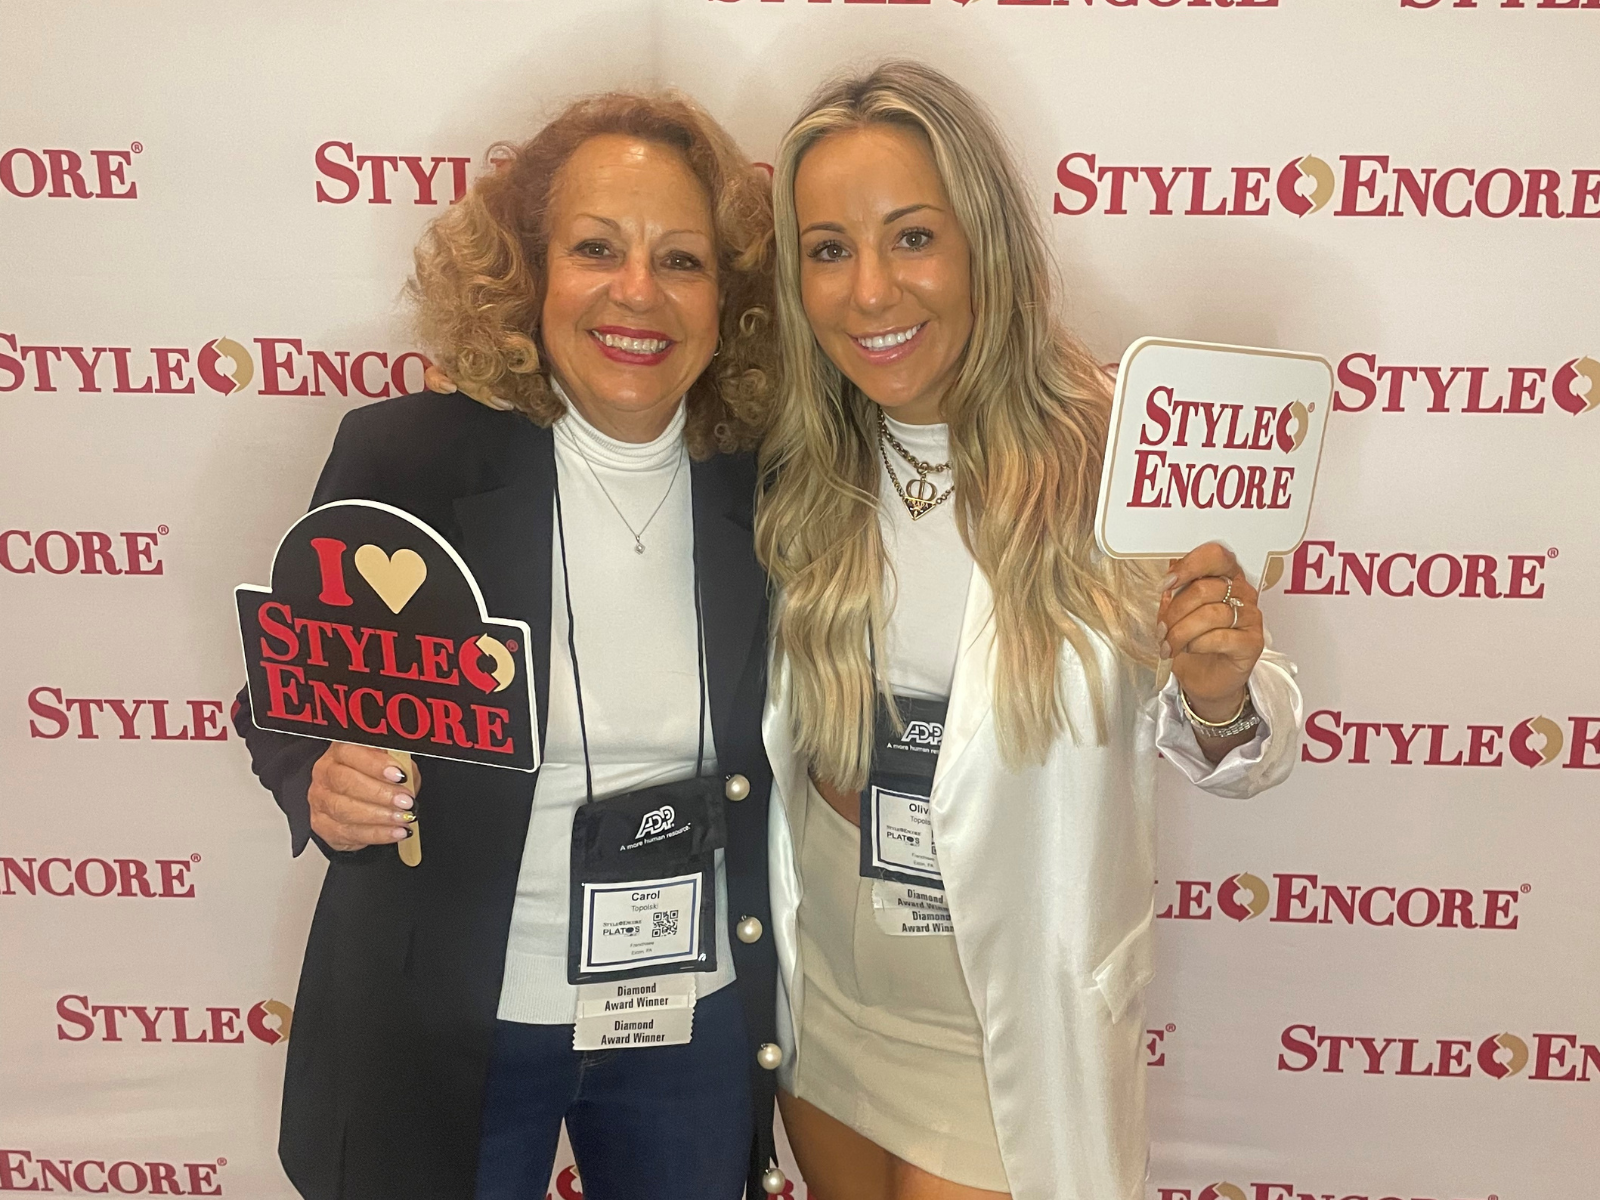 two women posing with Style Encore signs